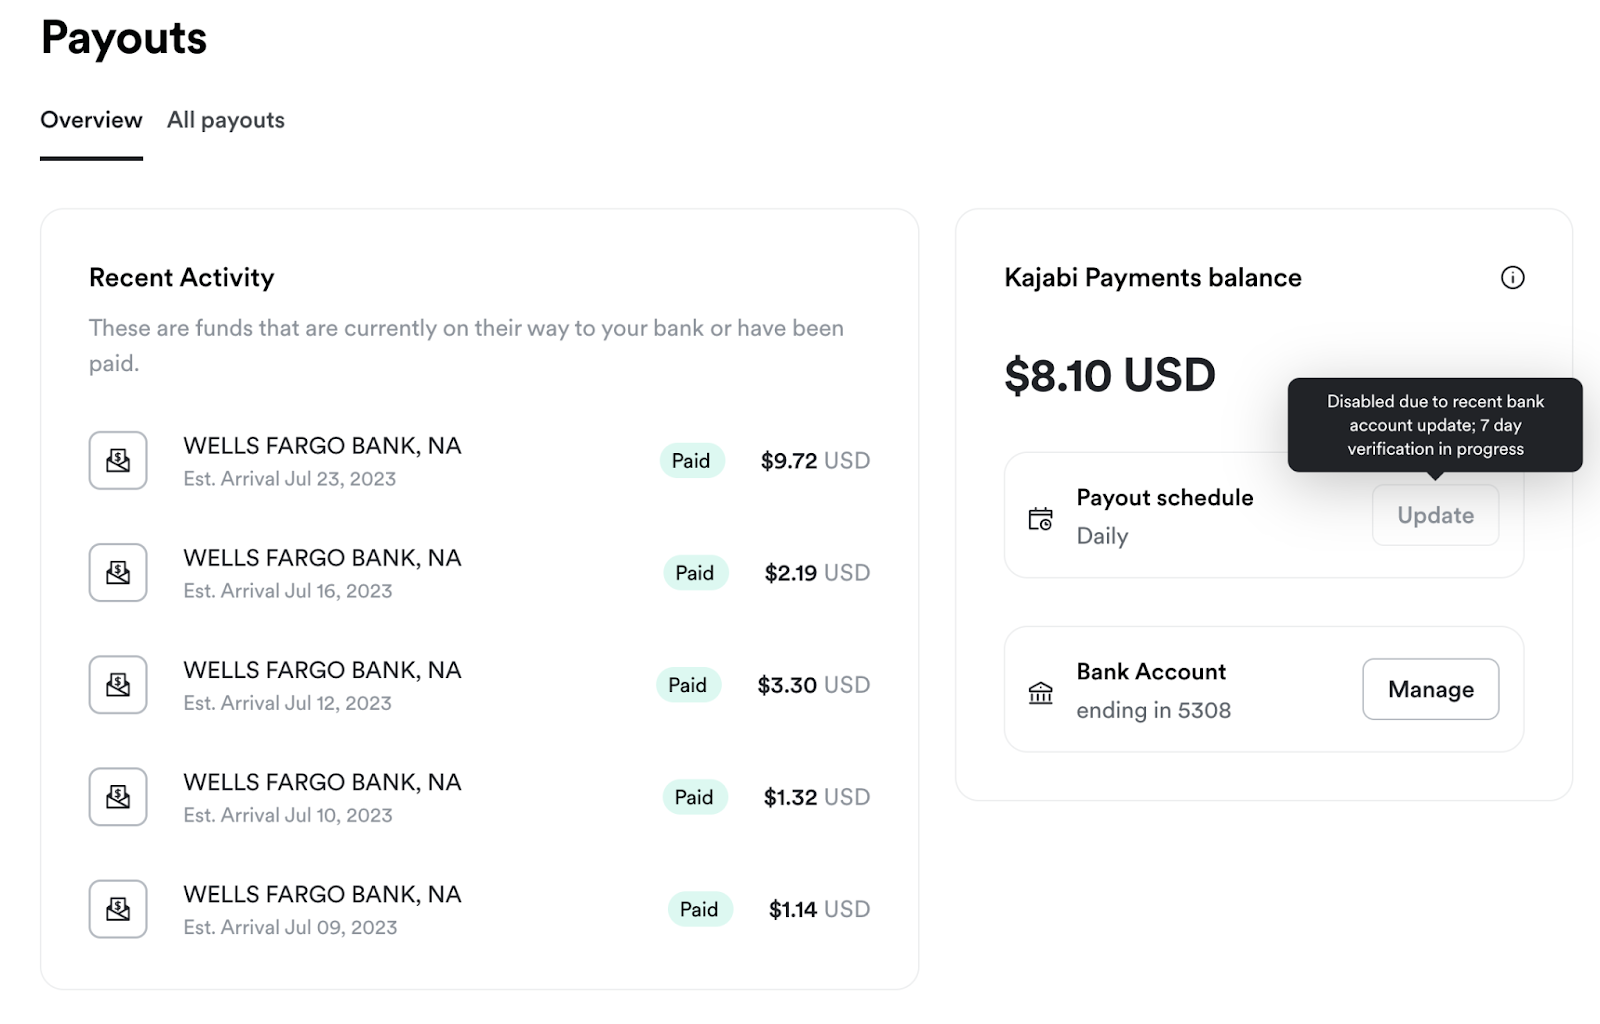 how-to-view-kajabi-payments-payouts-and-payout-details-help-center-article-google-docs-5.png